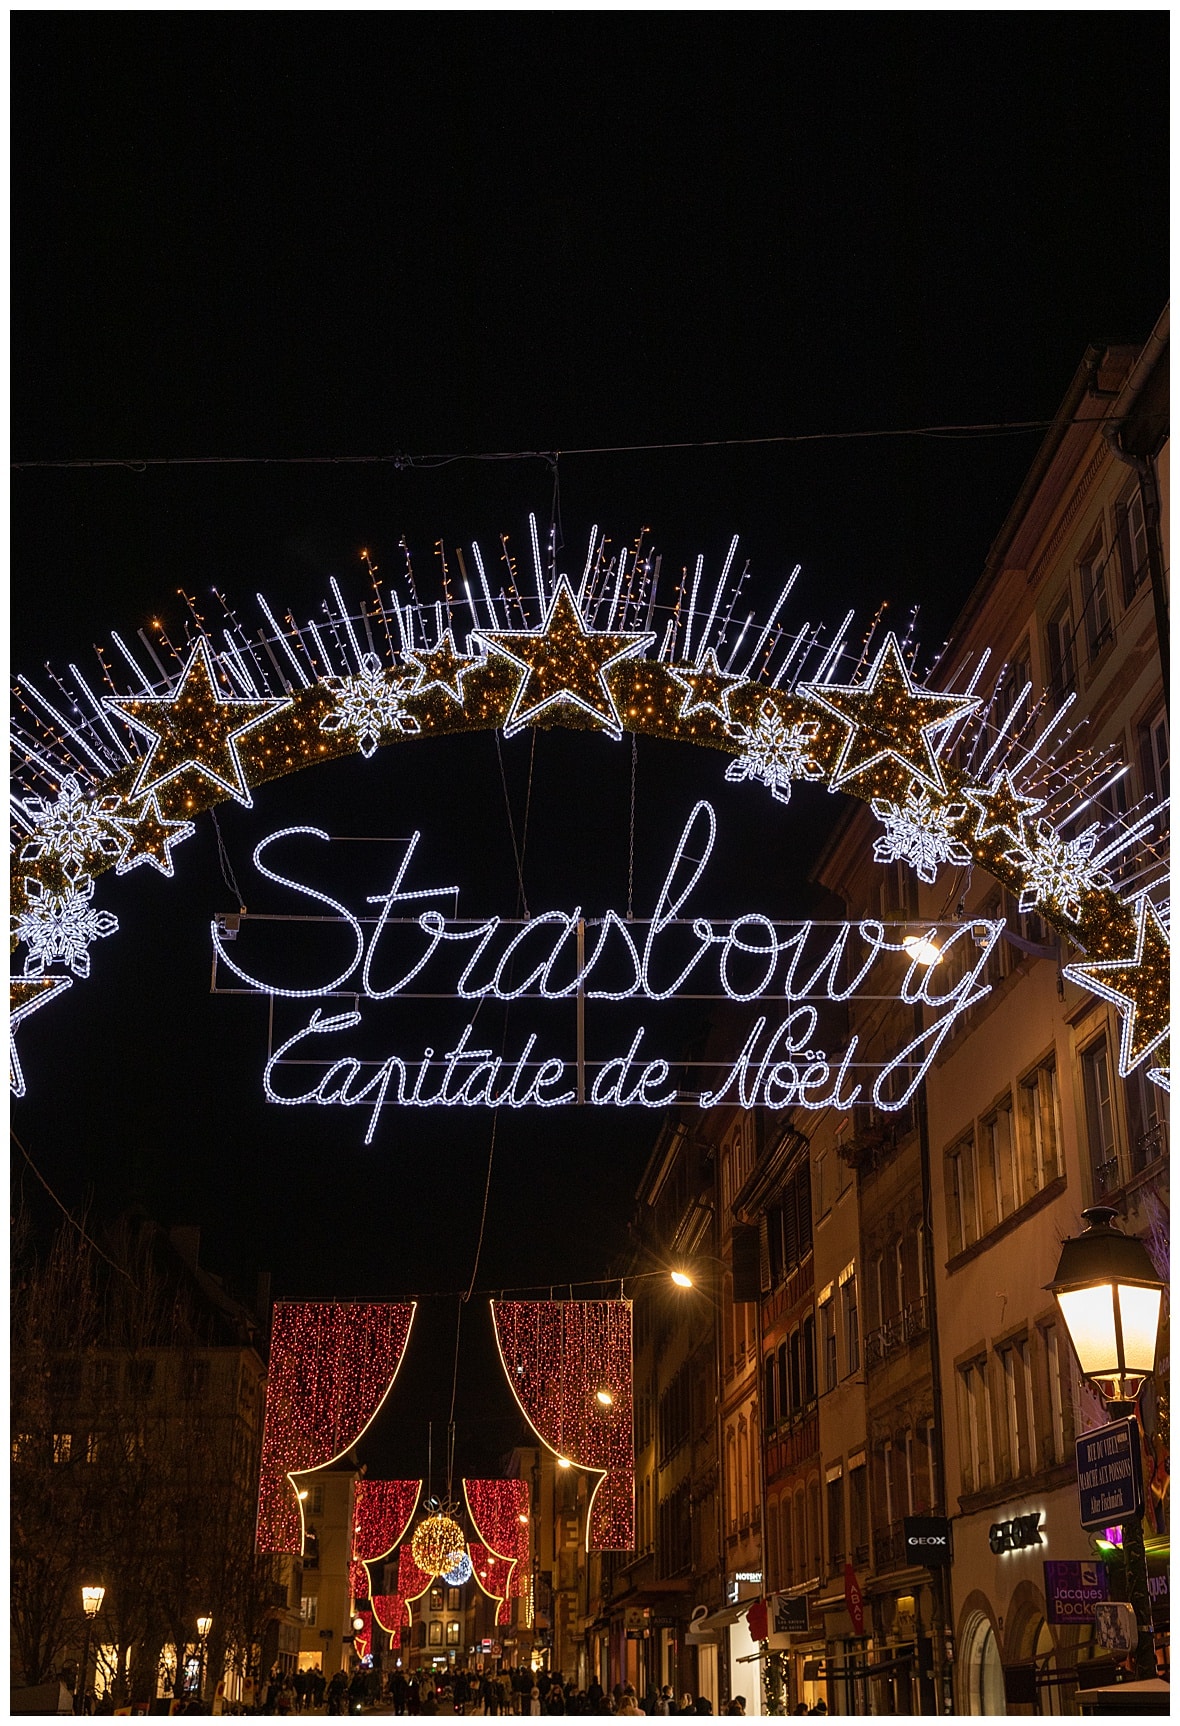 Journey of Doing - Strasbourg Christmas markets - Click here for everything you need to know to plan a trip to the Alsace Christmas markets, including the most famous Colmar and Strasbourg Christmas markets!